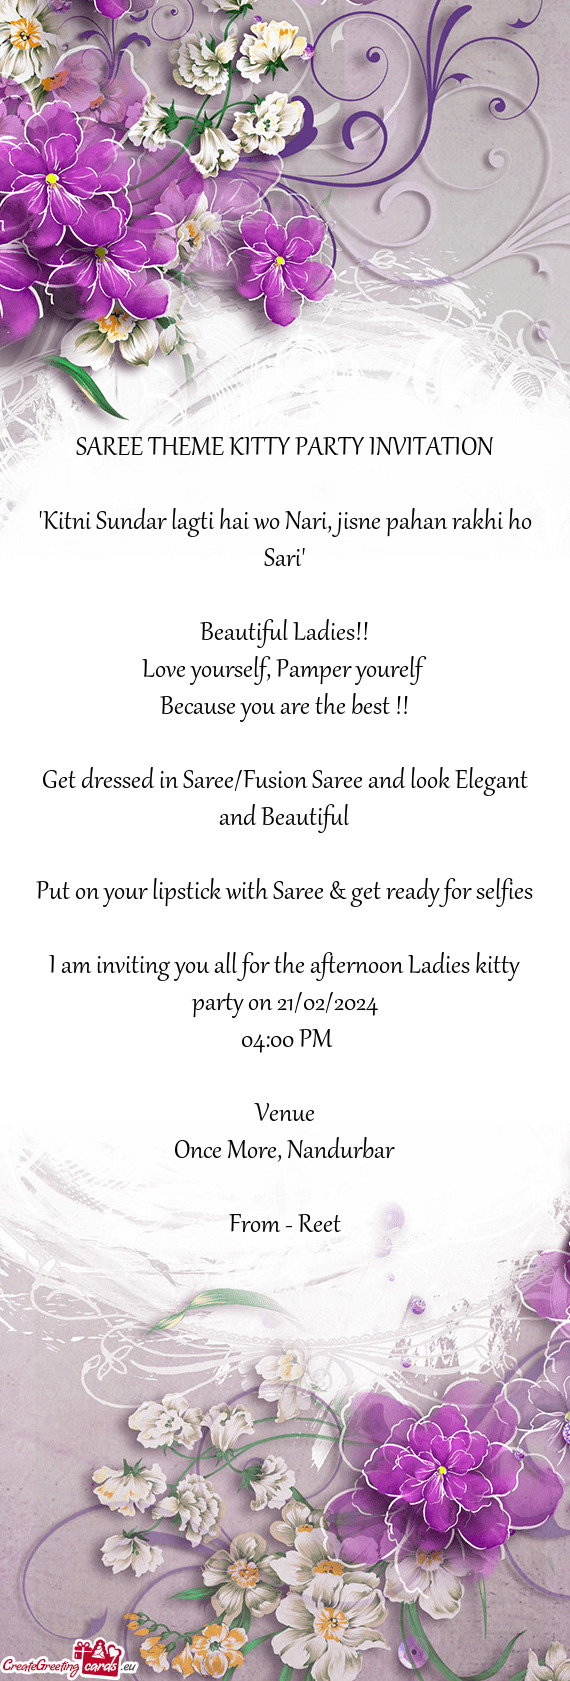 I am inviting you all for the afternoon Ladies kitty party on 21/02/2024